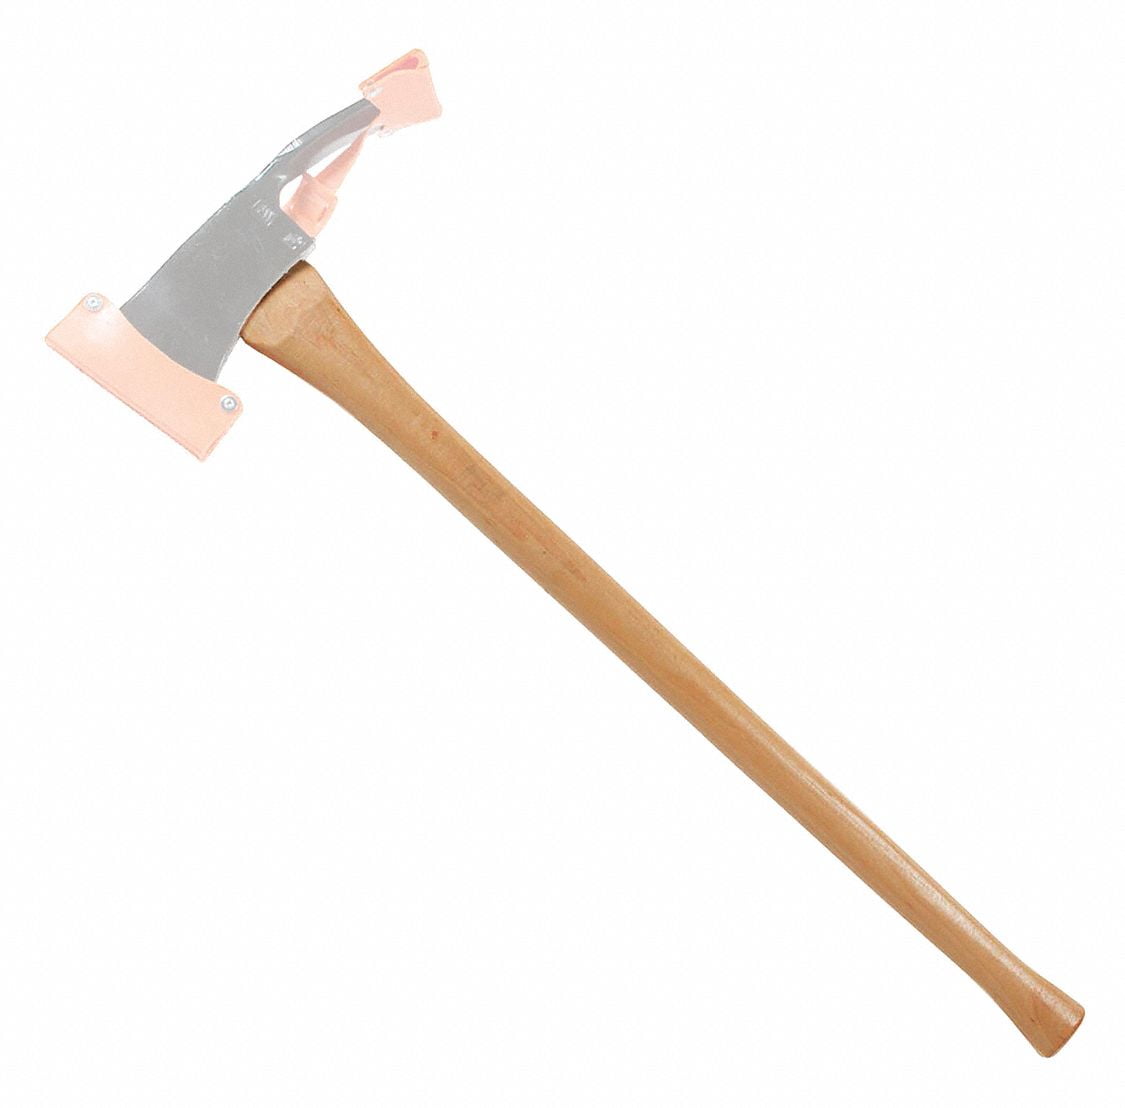 38PE136 for sale online Council Tools Pulaski Axe Single Bit Hickory 36 In 